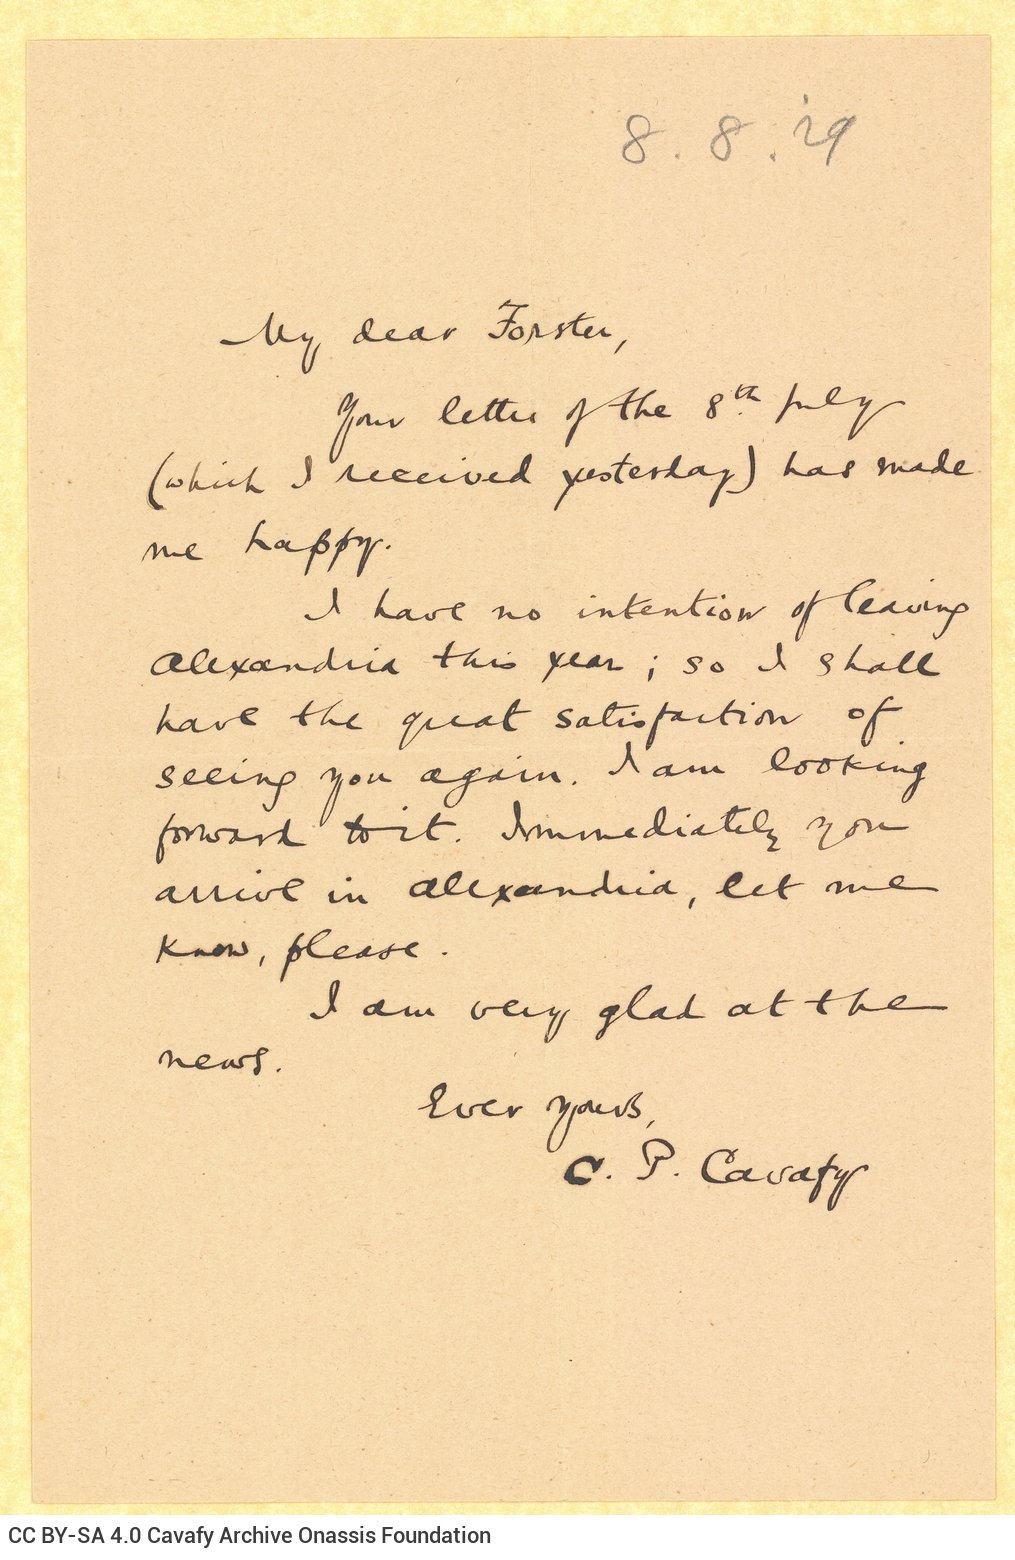 Handwritten copy of a letter by Cavafy to E. M. Forster on one side of a sheet. Cavafy expresses his satisfaction in the pros